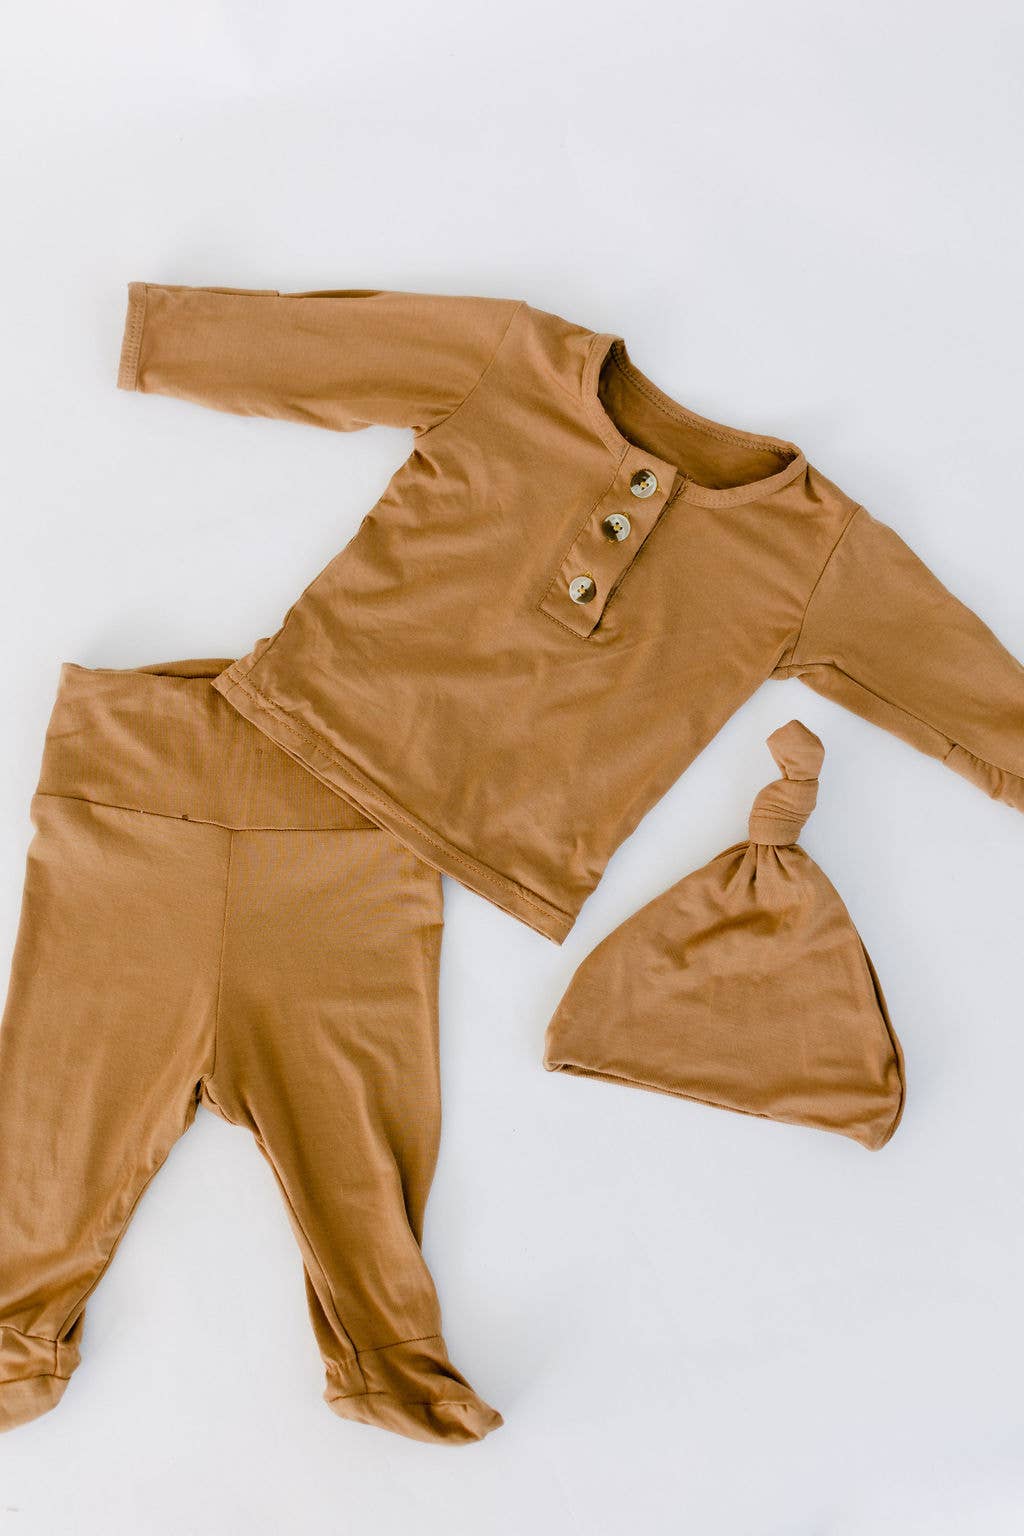 Top & Bottom Baby Outfit (Newborn - 12 months sizes) - Camel